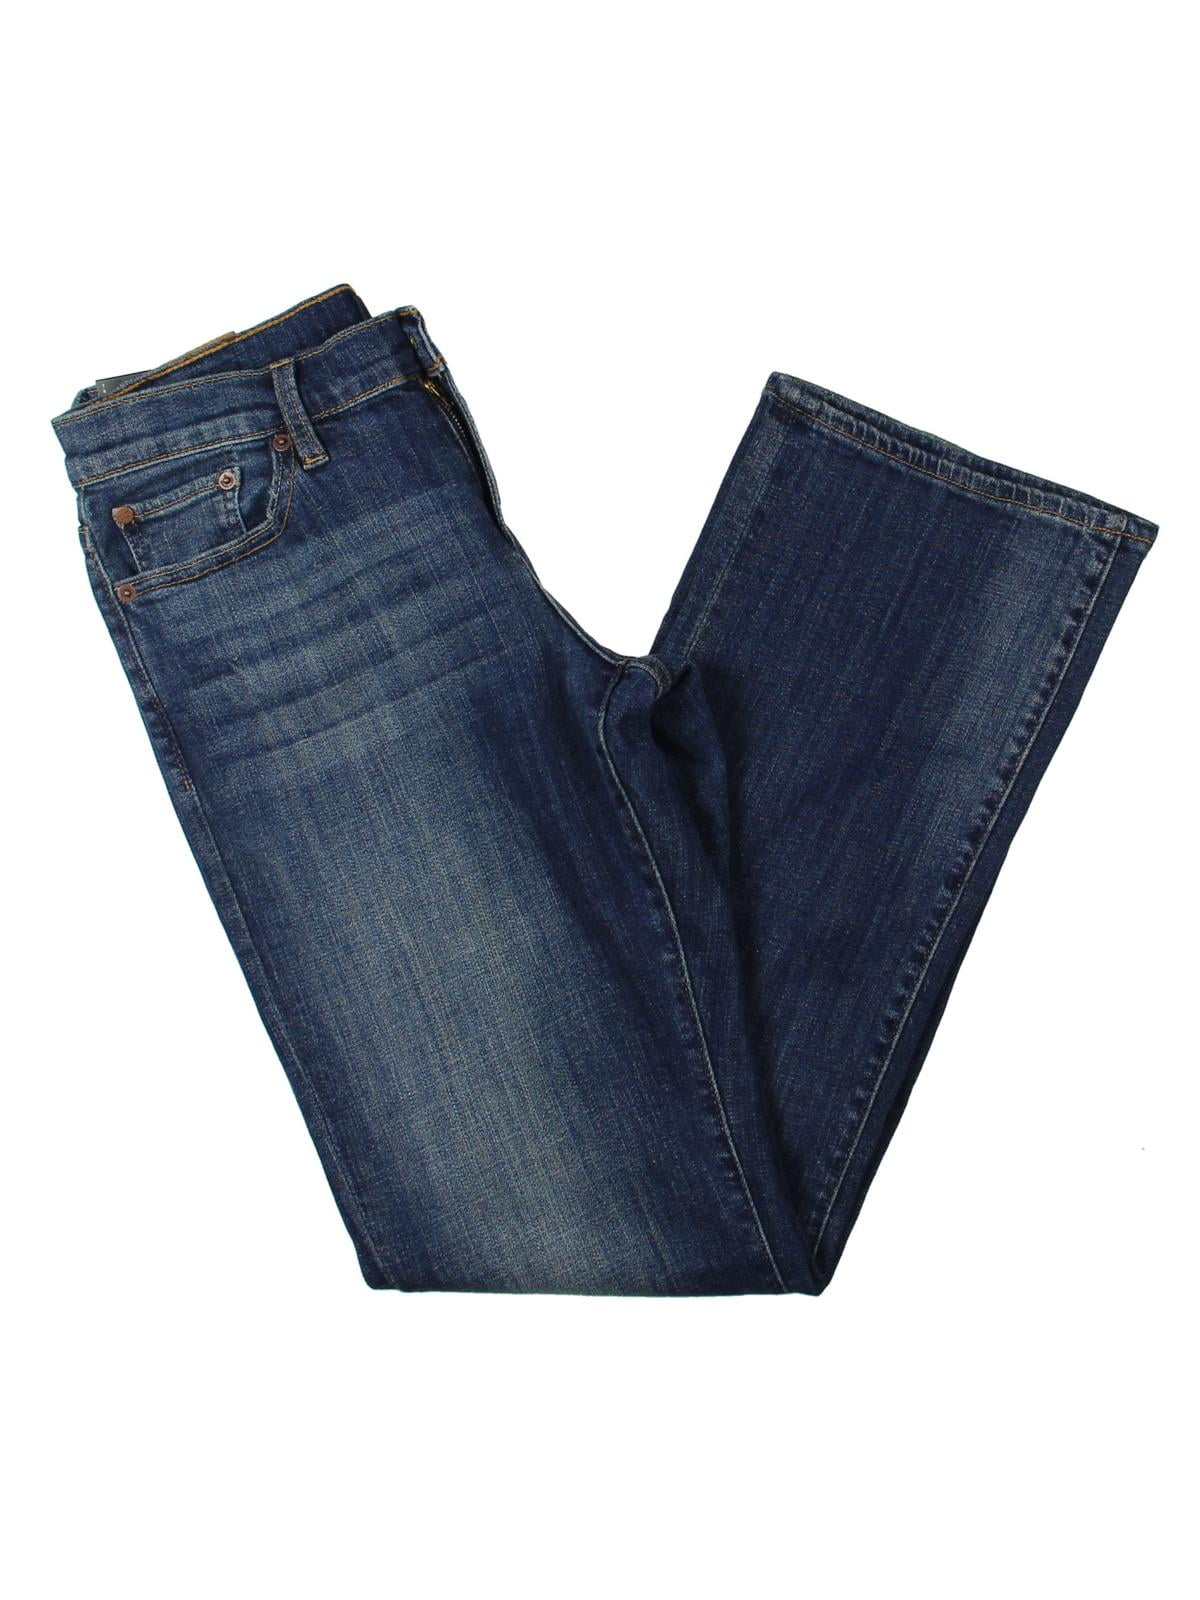 Lucky Brand Pockets Relaxed Jeans for Women